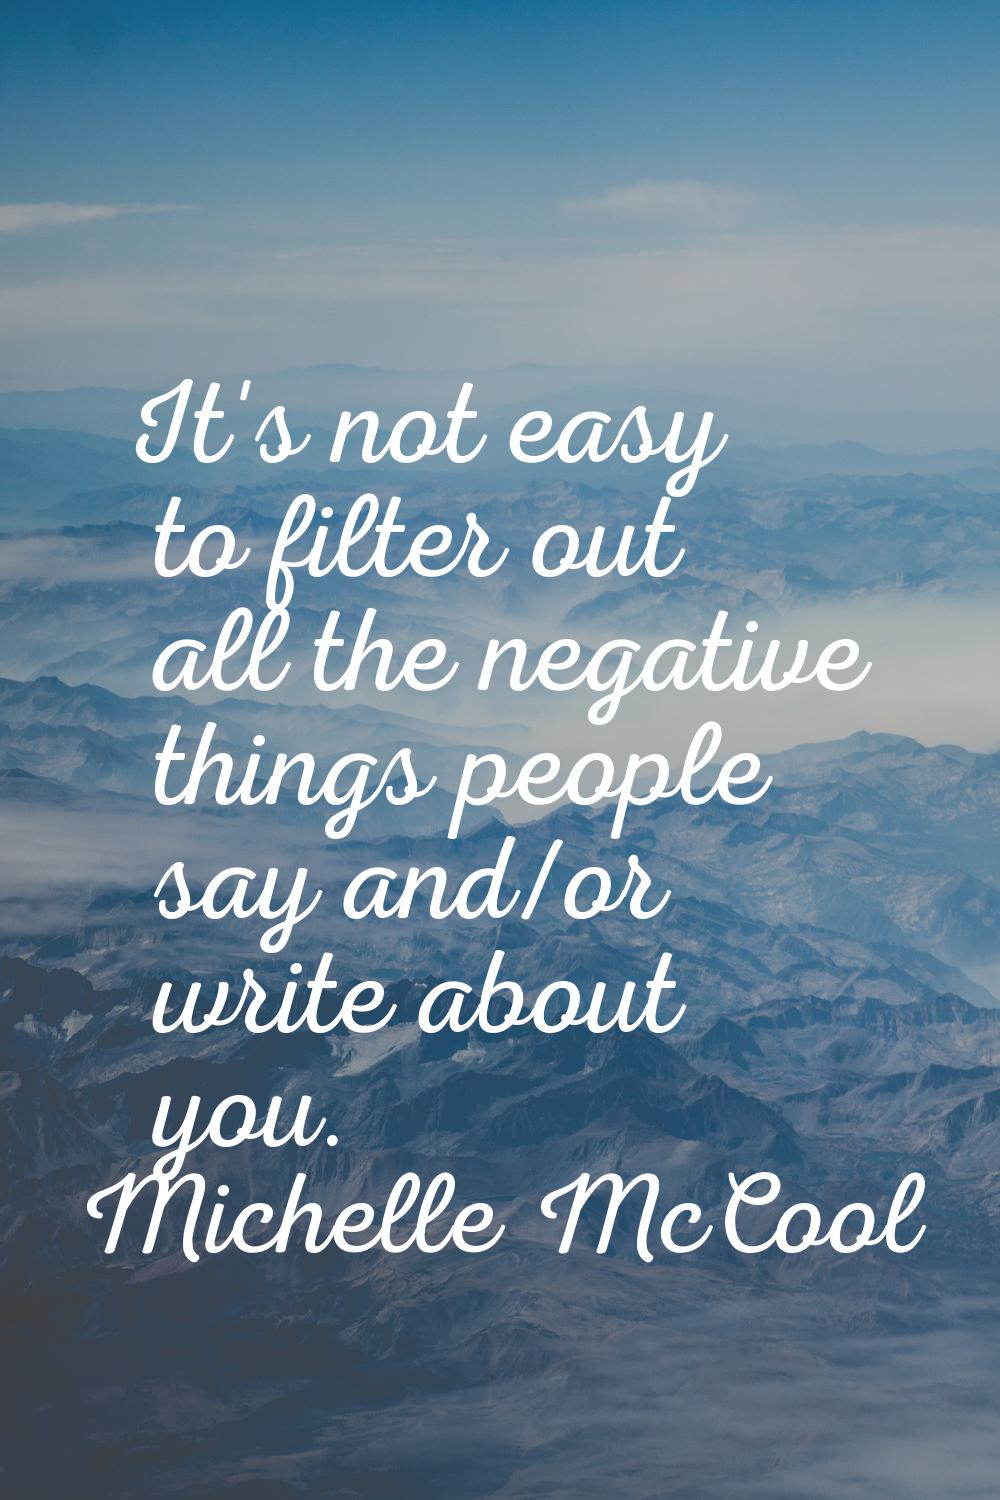 It's not easy to filter out all the negative things people say and/or write about you.